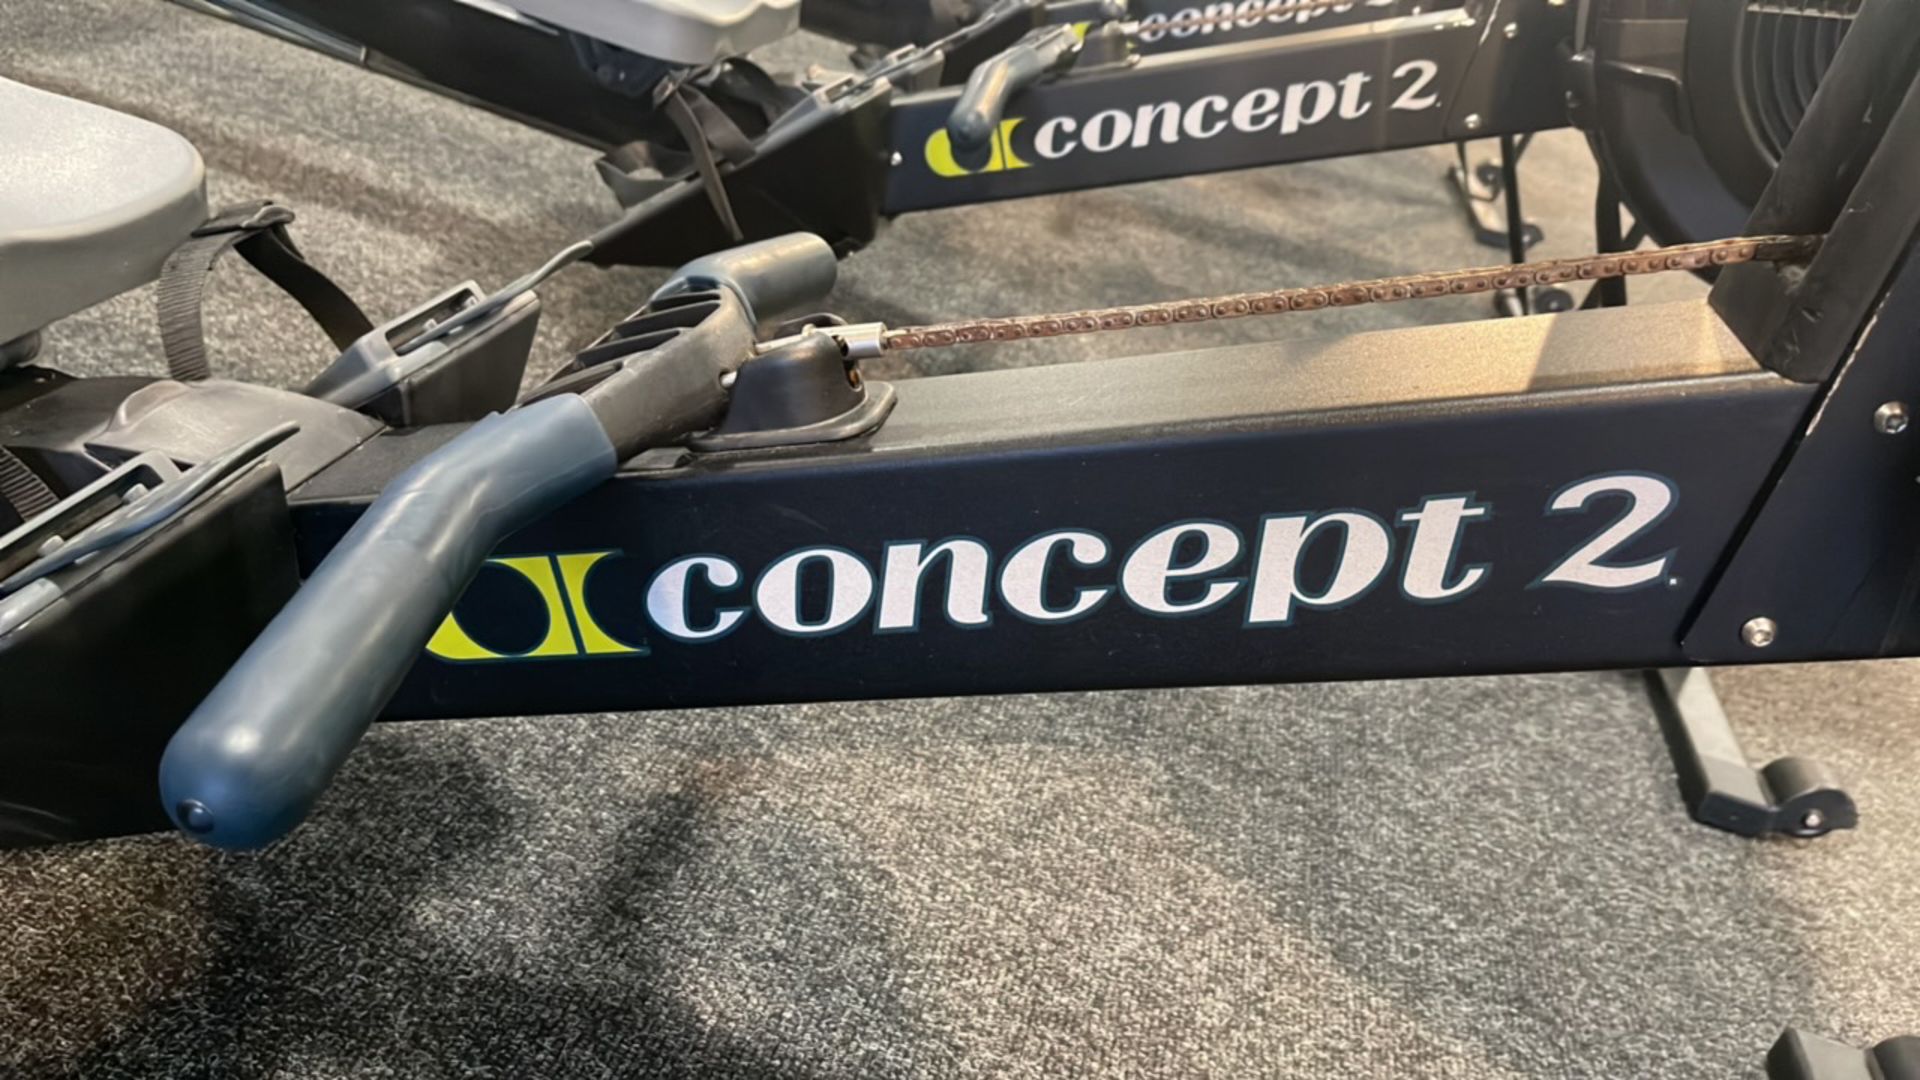 Concept 2 Rower - Image 2 of 7